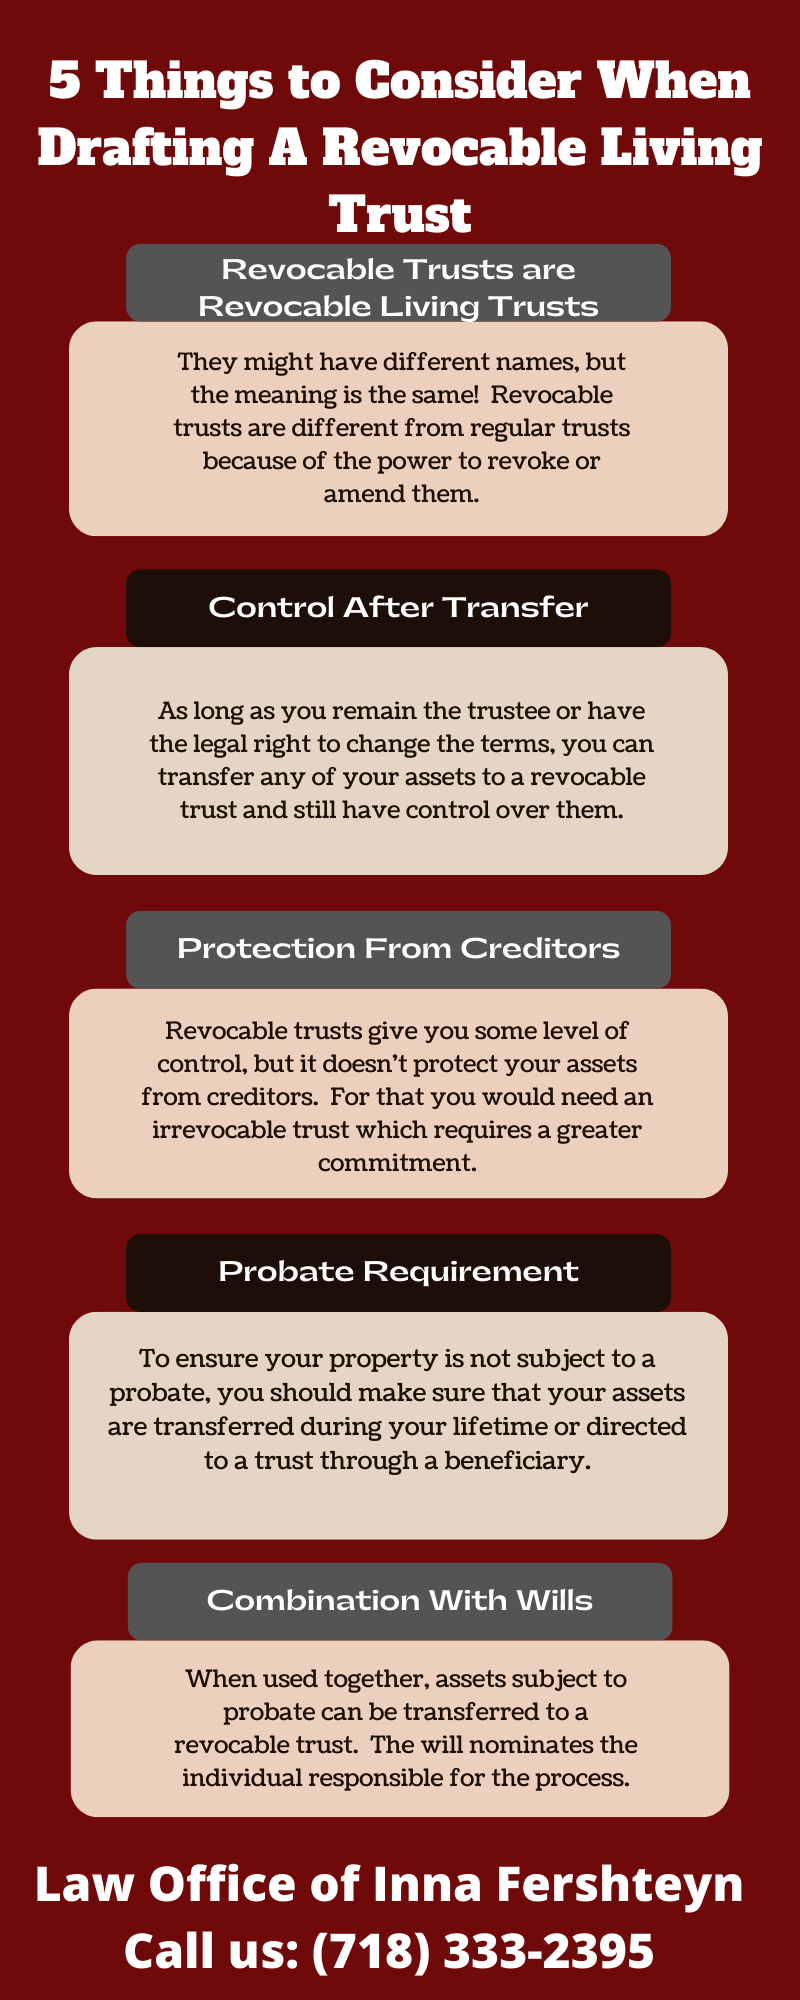 5 Things to Consider When Drafting A Revocable Living Trust Infographic